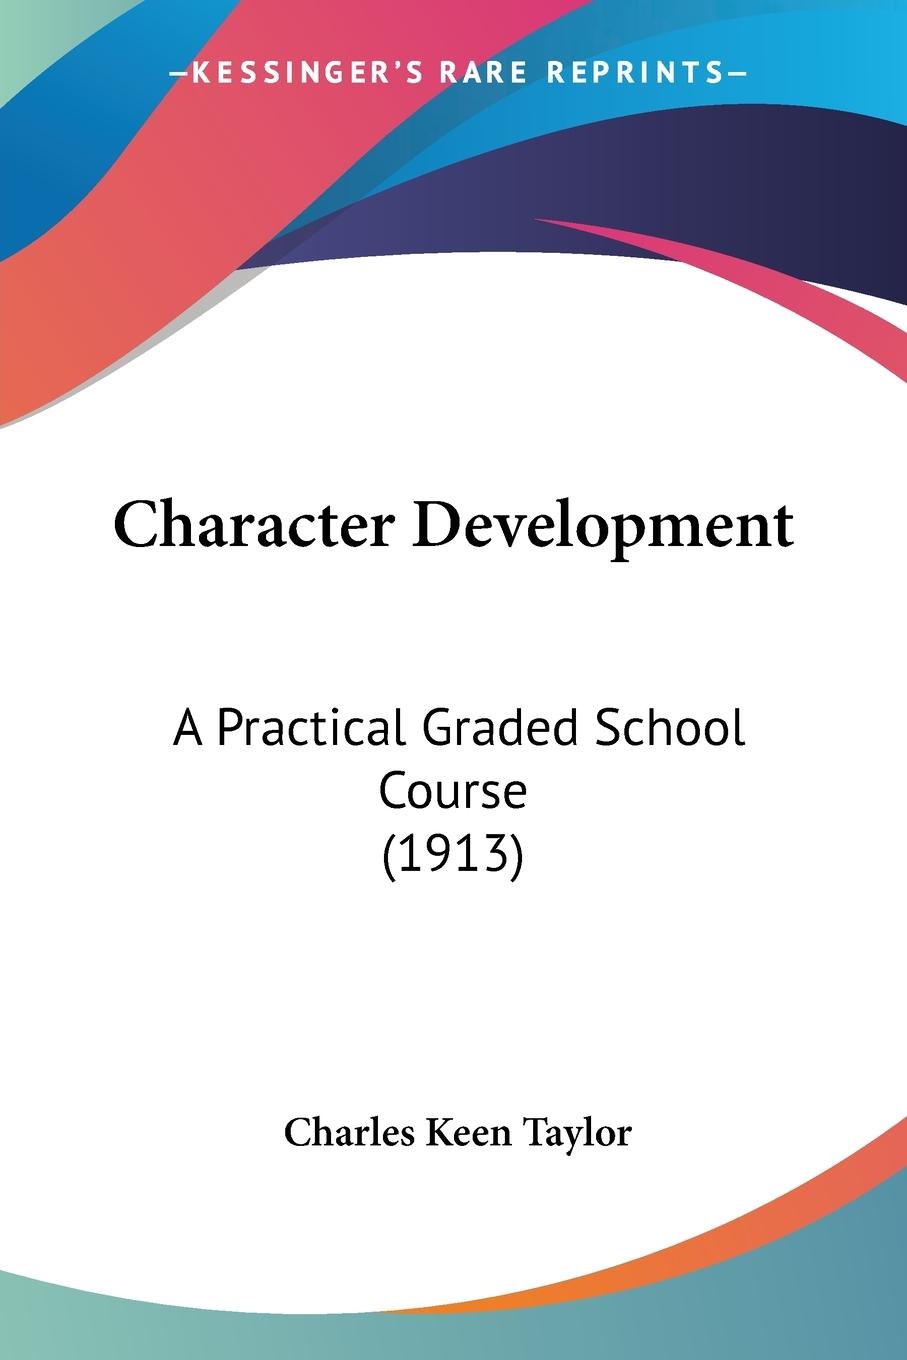 Character Development - Taylor, Charles Keen